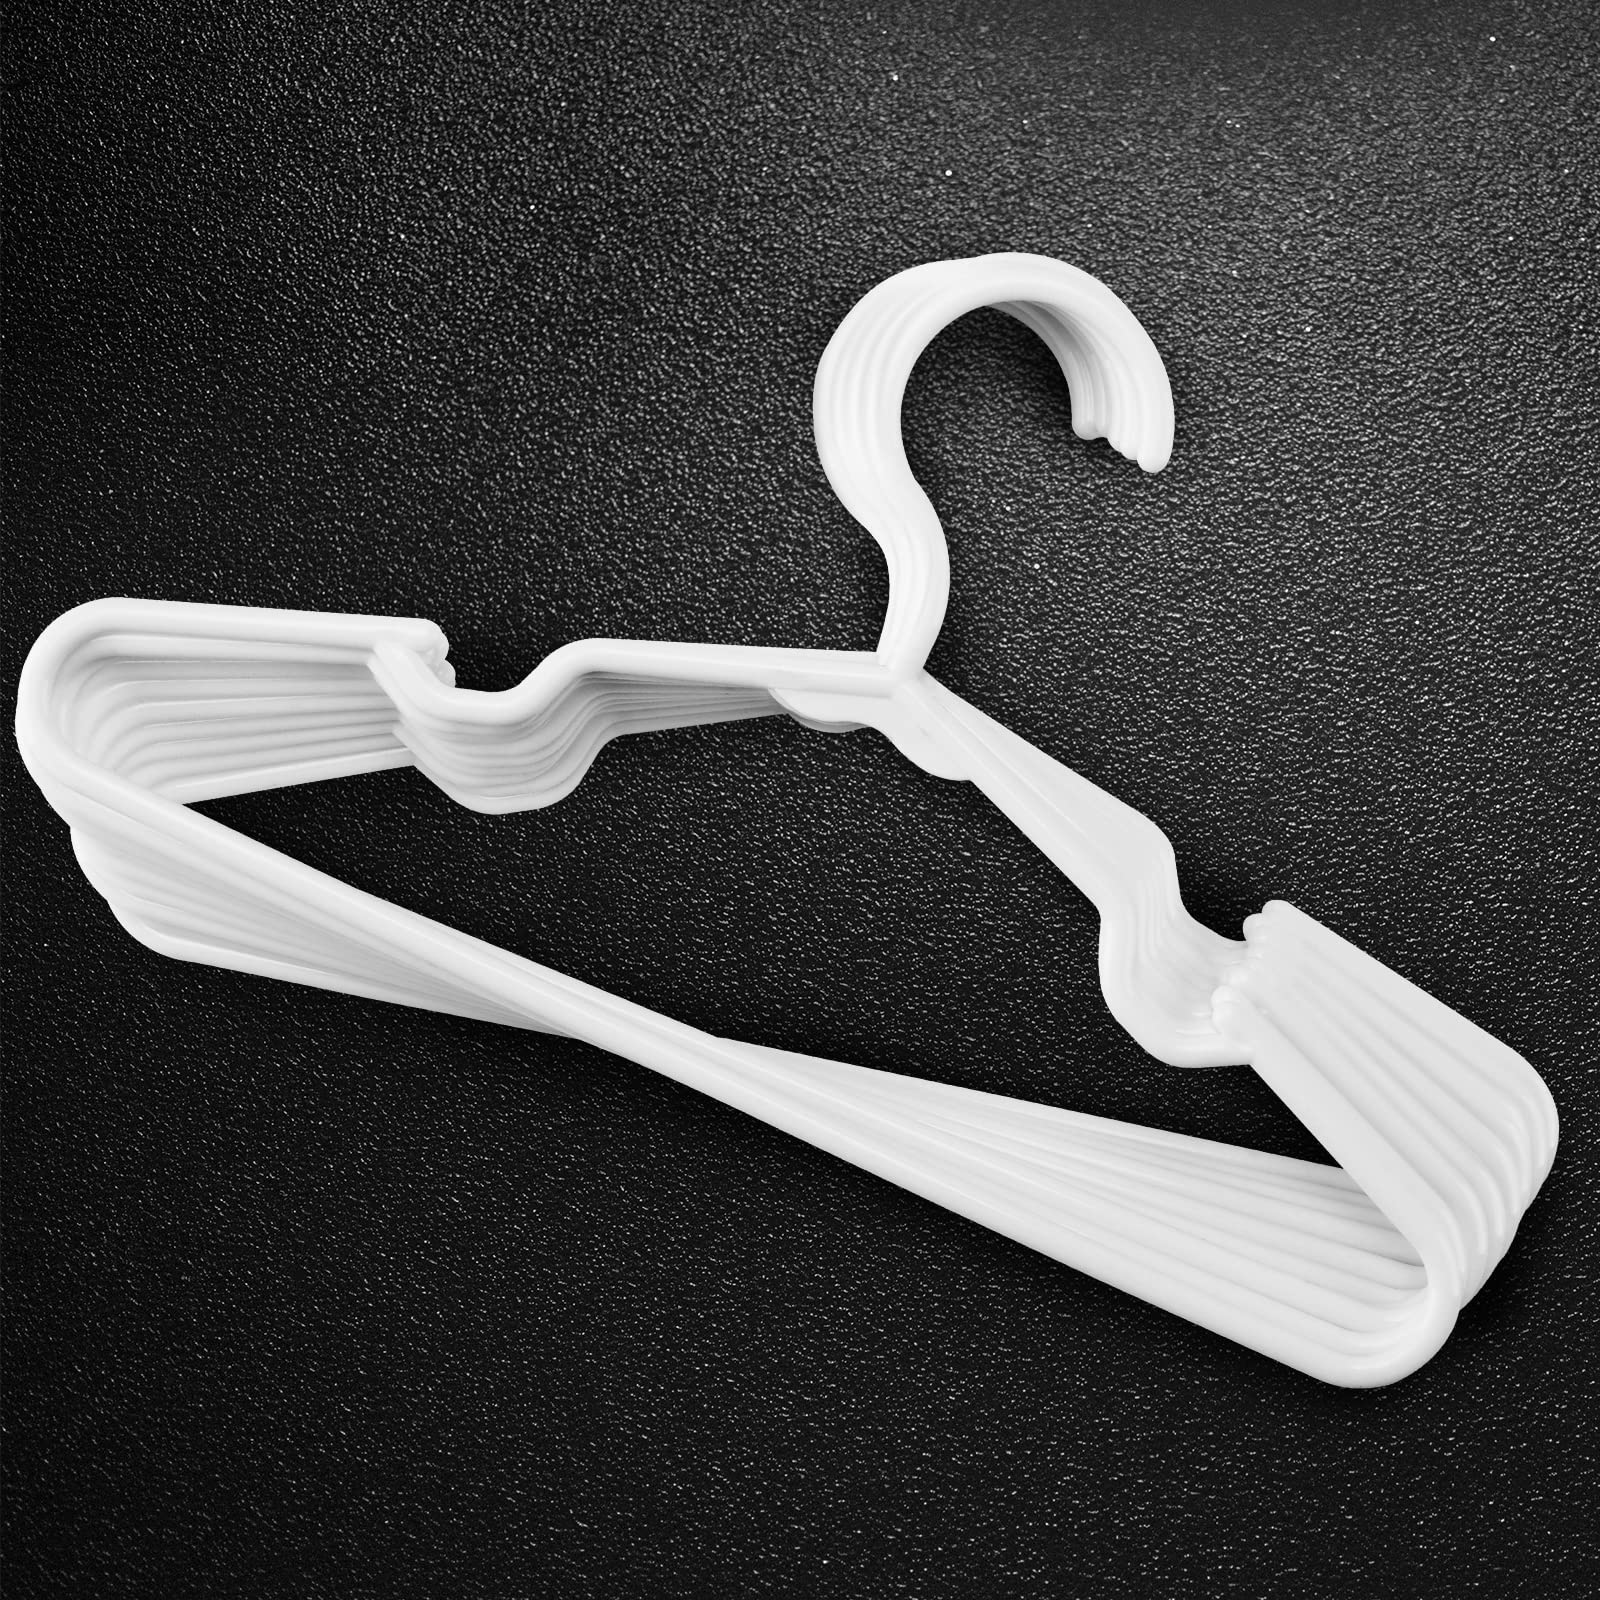 trusir Kids Hangers 50 Pack - 11. 5 Inch Baby Hangers for Closet - White Hangers for Closet - Toddler Hangers for Clost & Child Clothes for Clost - Ideal for Baby Standard Use (White)